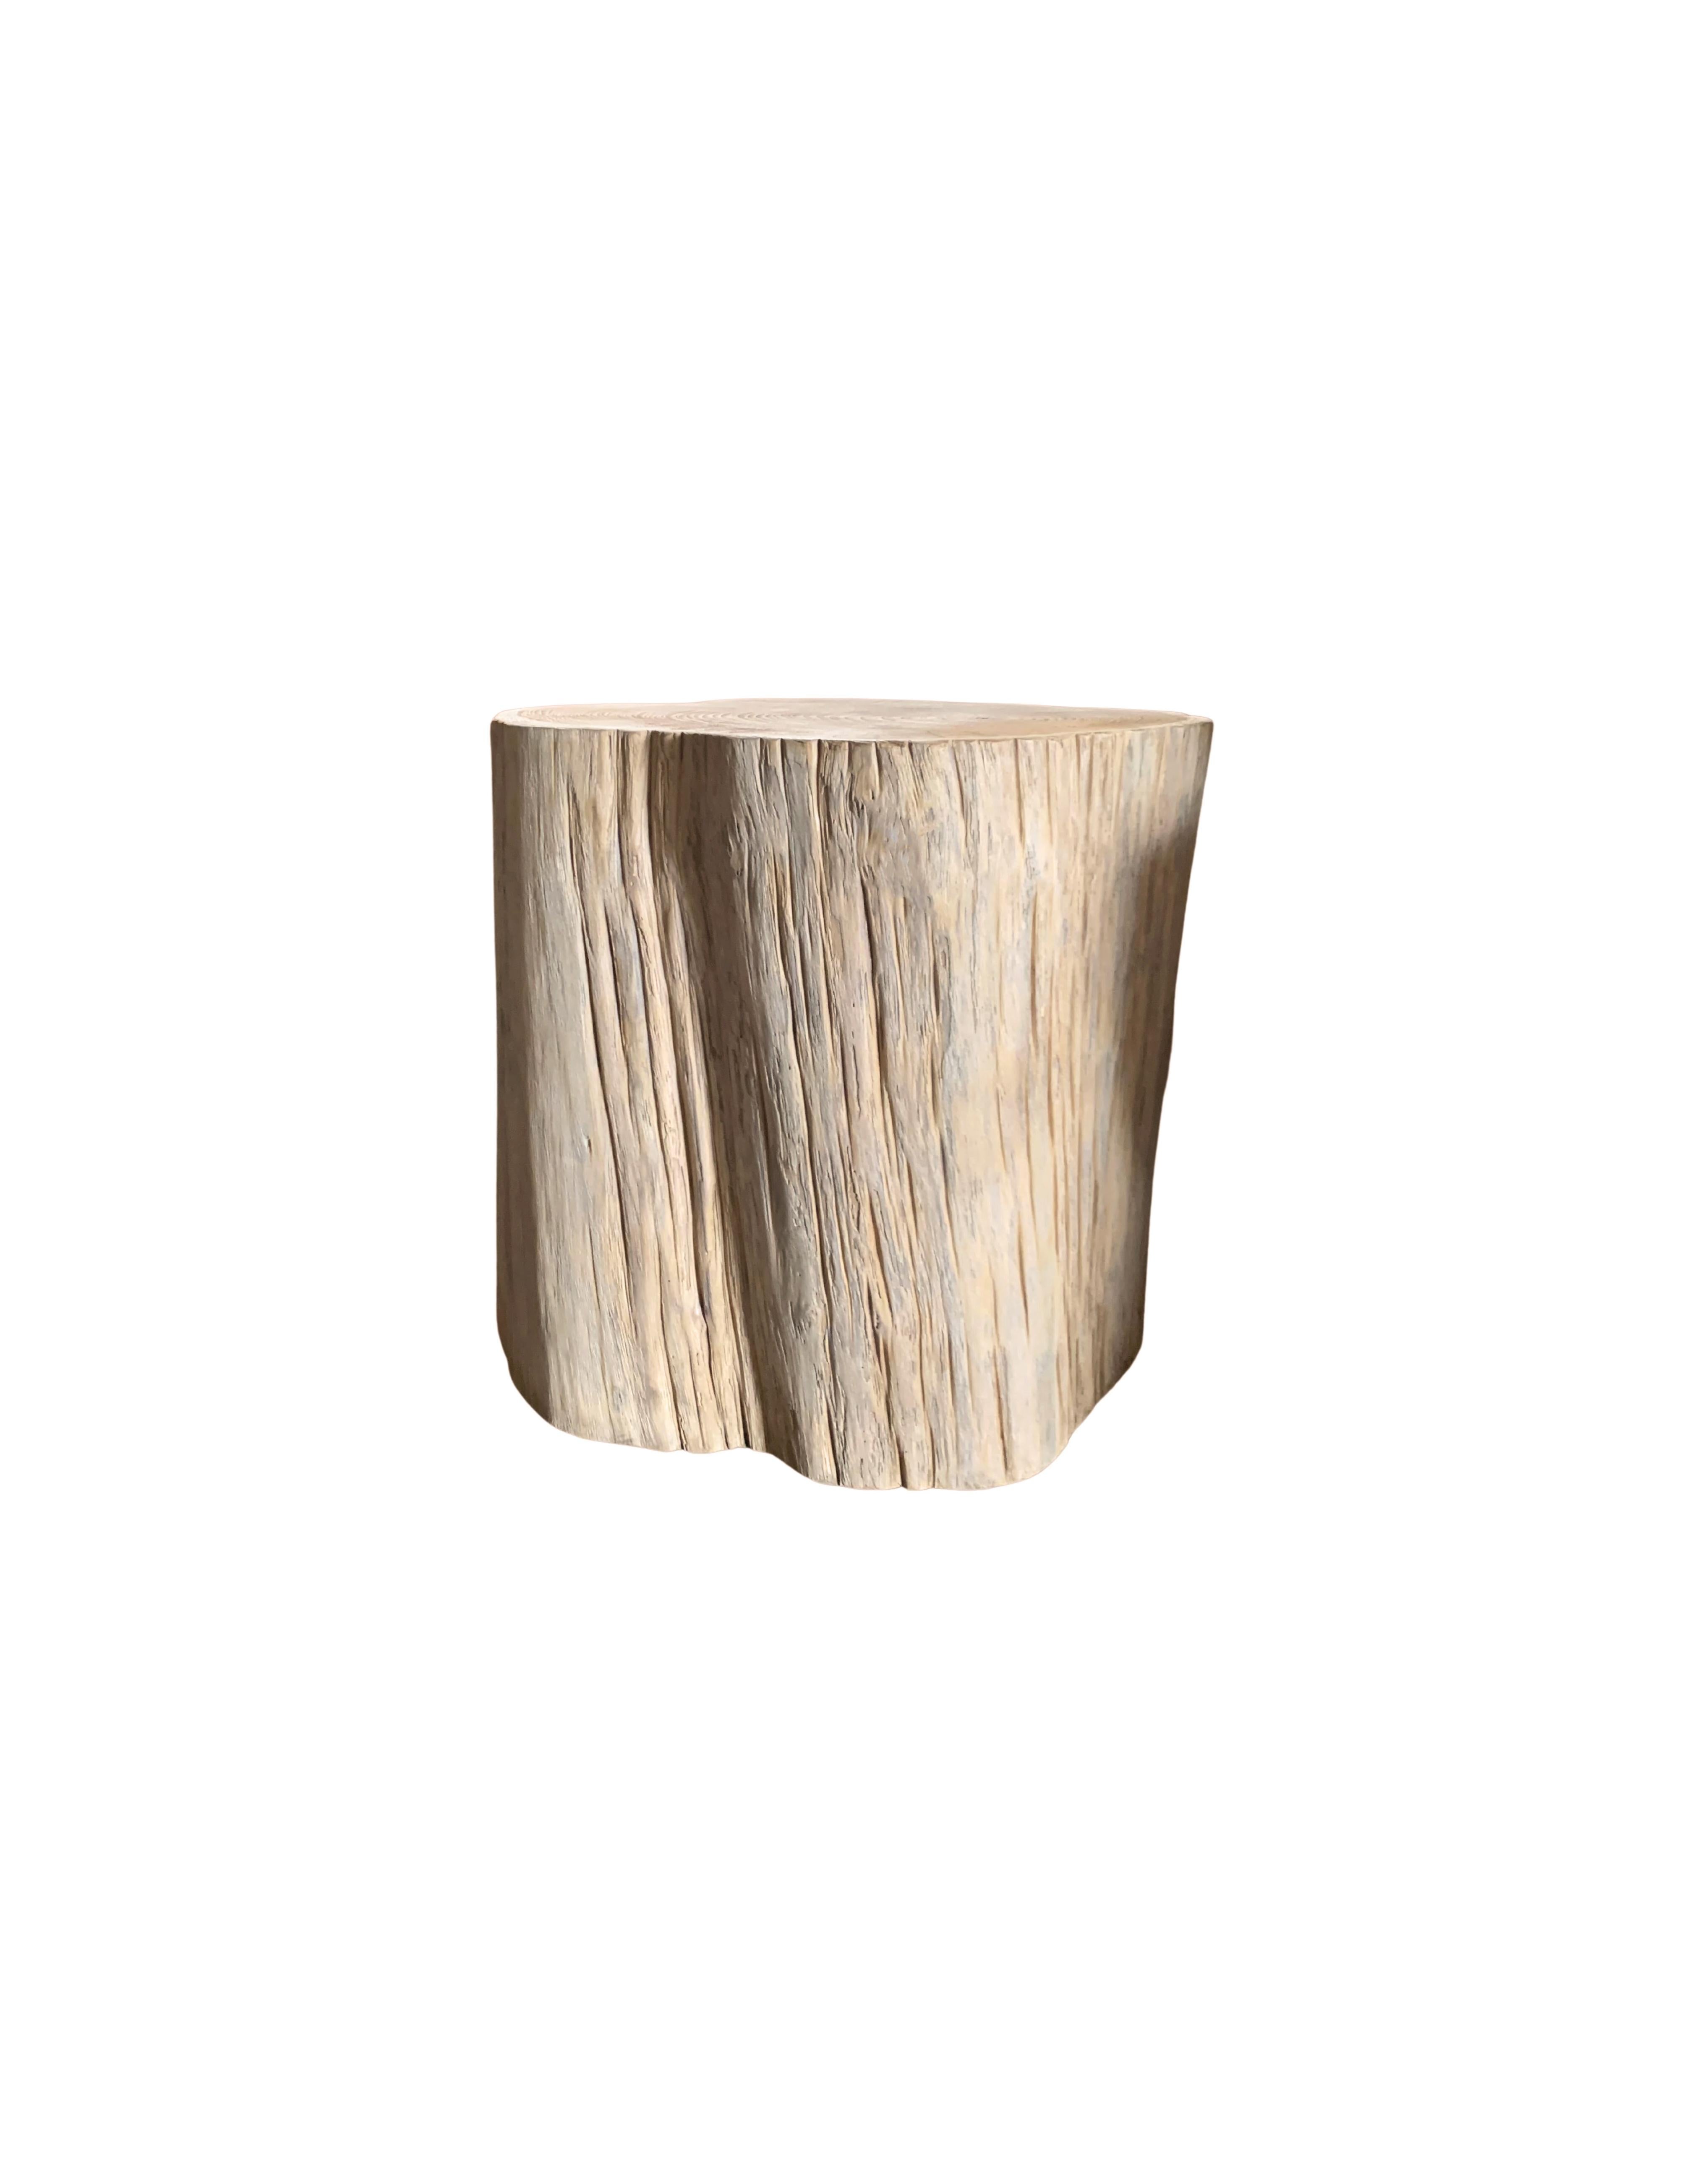 Indonesian Tree Trunk Side Table Solid Mango Wood Bleached Finish Modern Organic For Sale